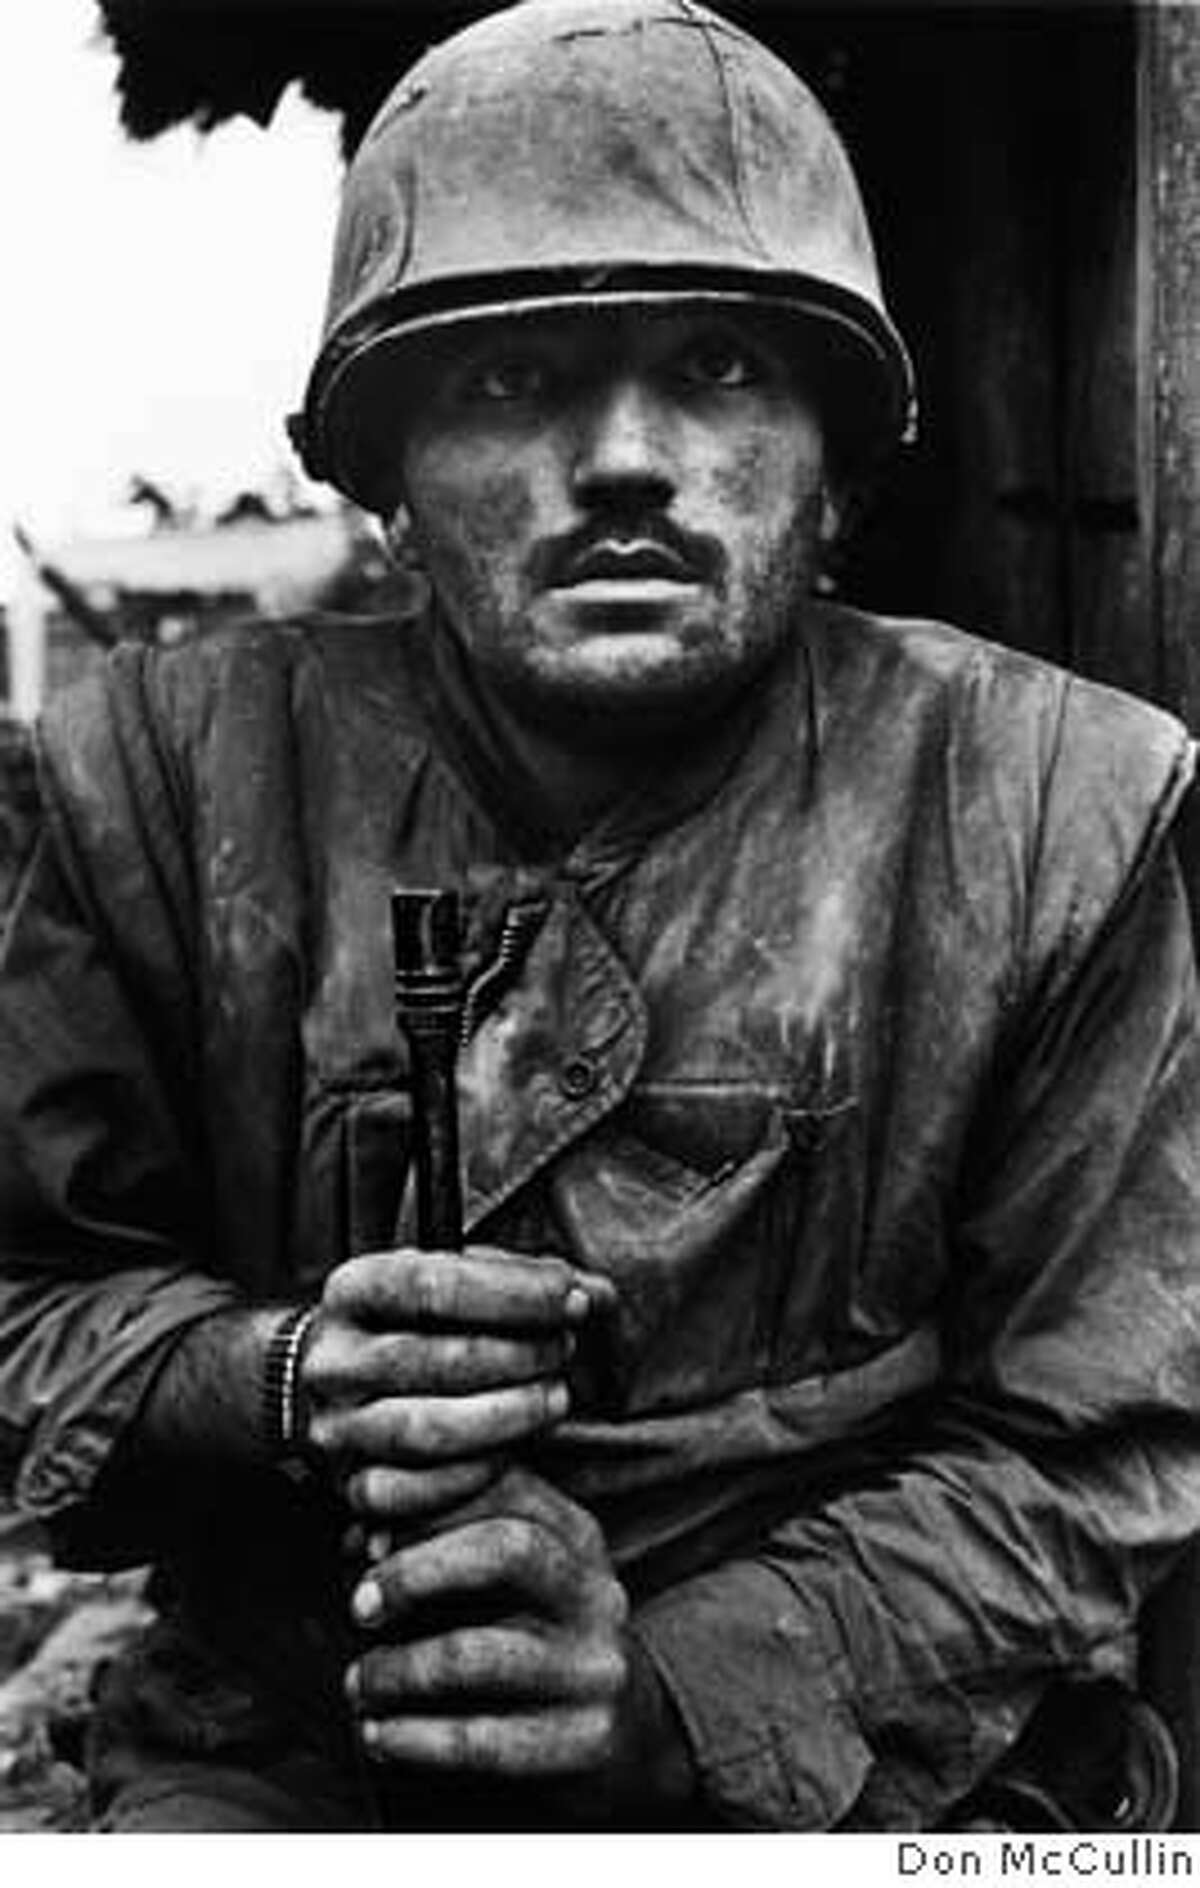 Shell-shocked U.S. Marine during Tet offensive, The Citadel, battle of Hu�, South Vietnam, February 1968 Don McCullin � Don McCULLIN / CONTACT Press Images